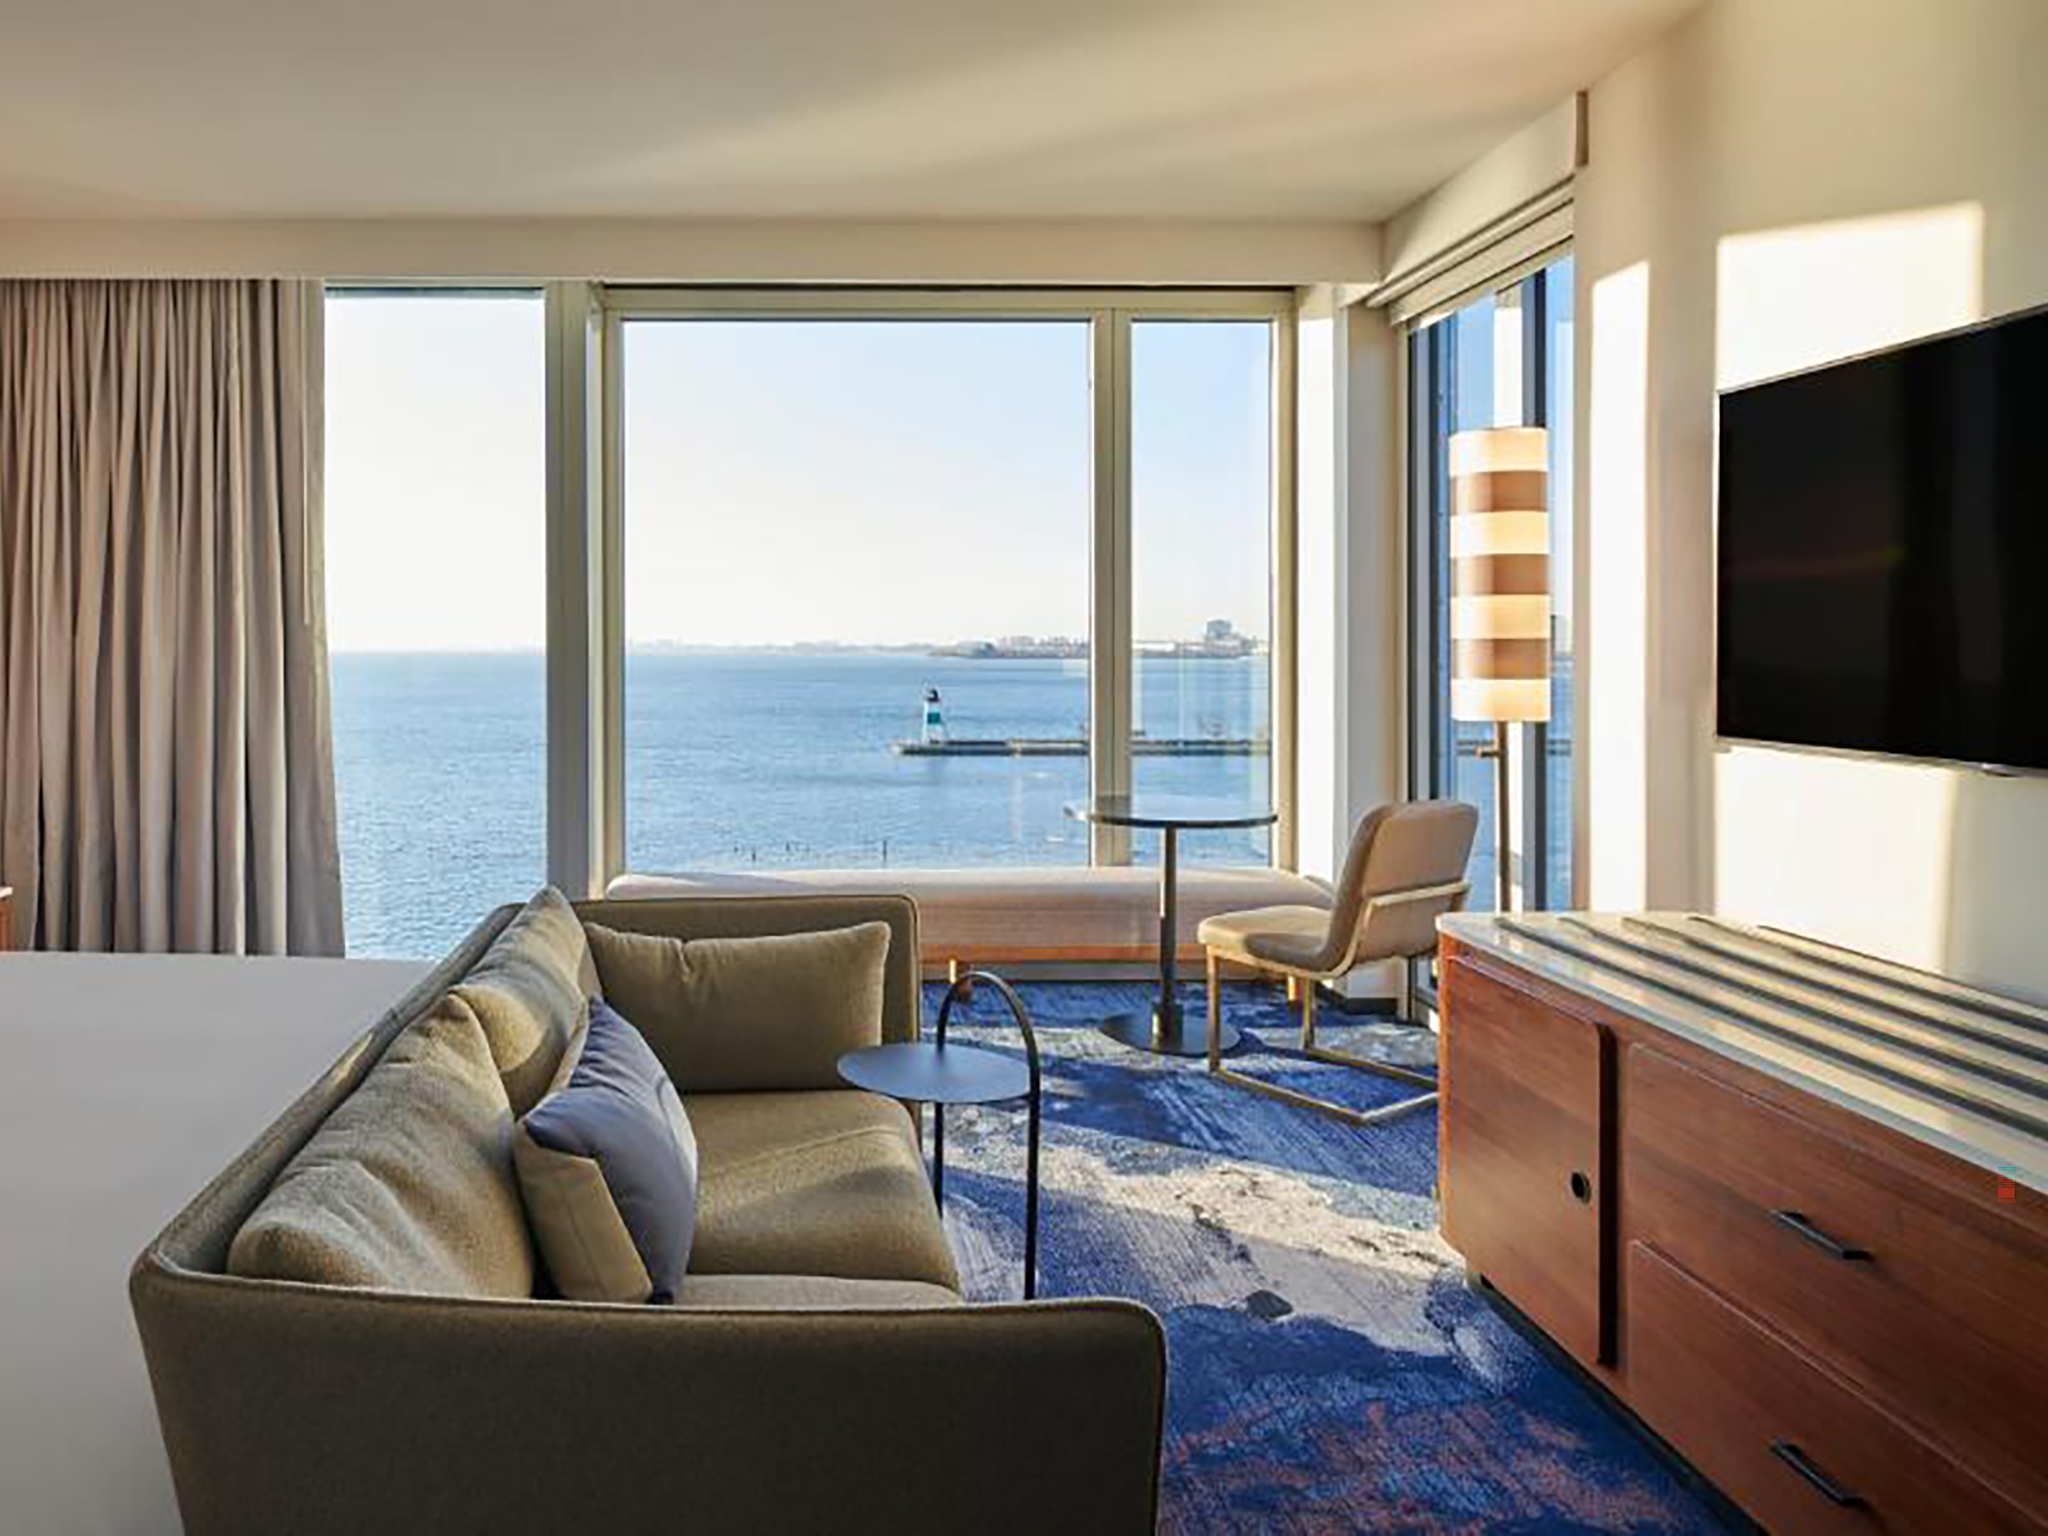 The Sable has rooms with floor-to-ceiling windows that look out on the lake